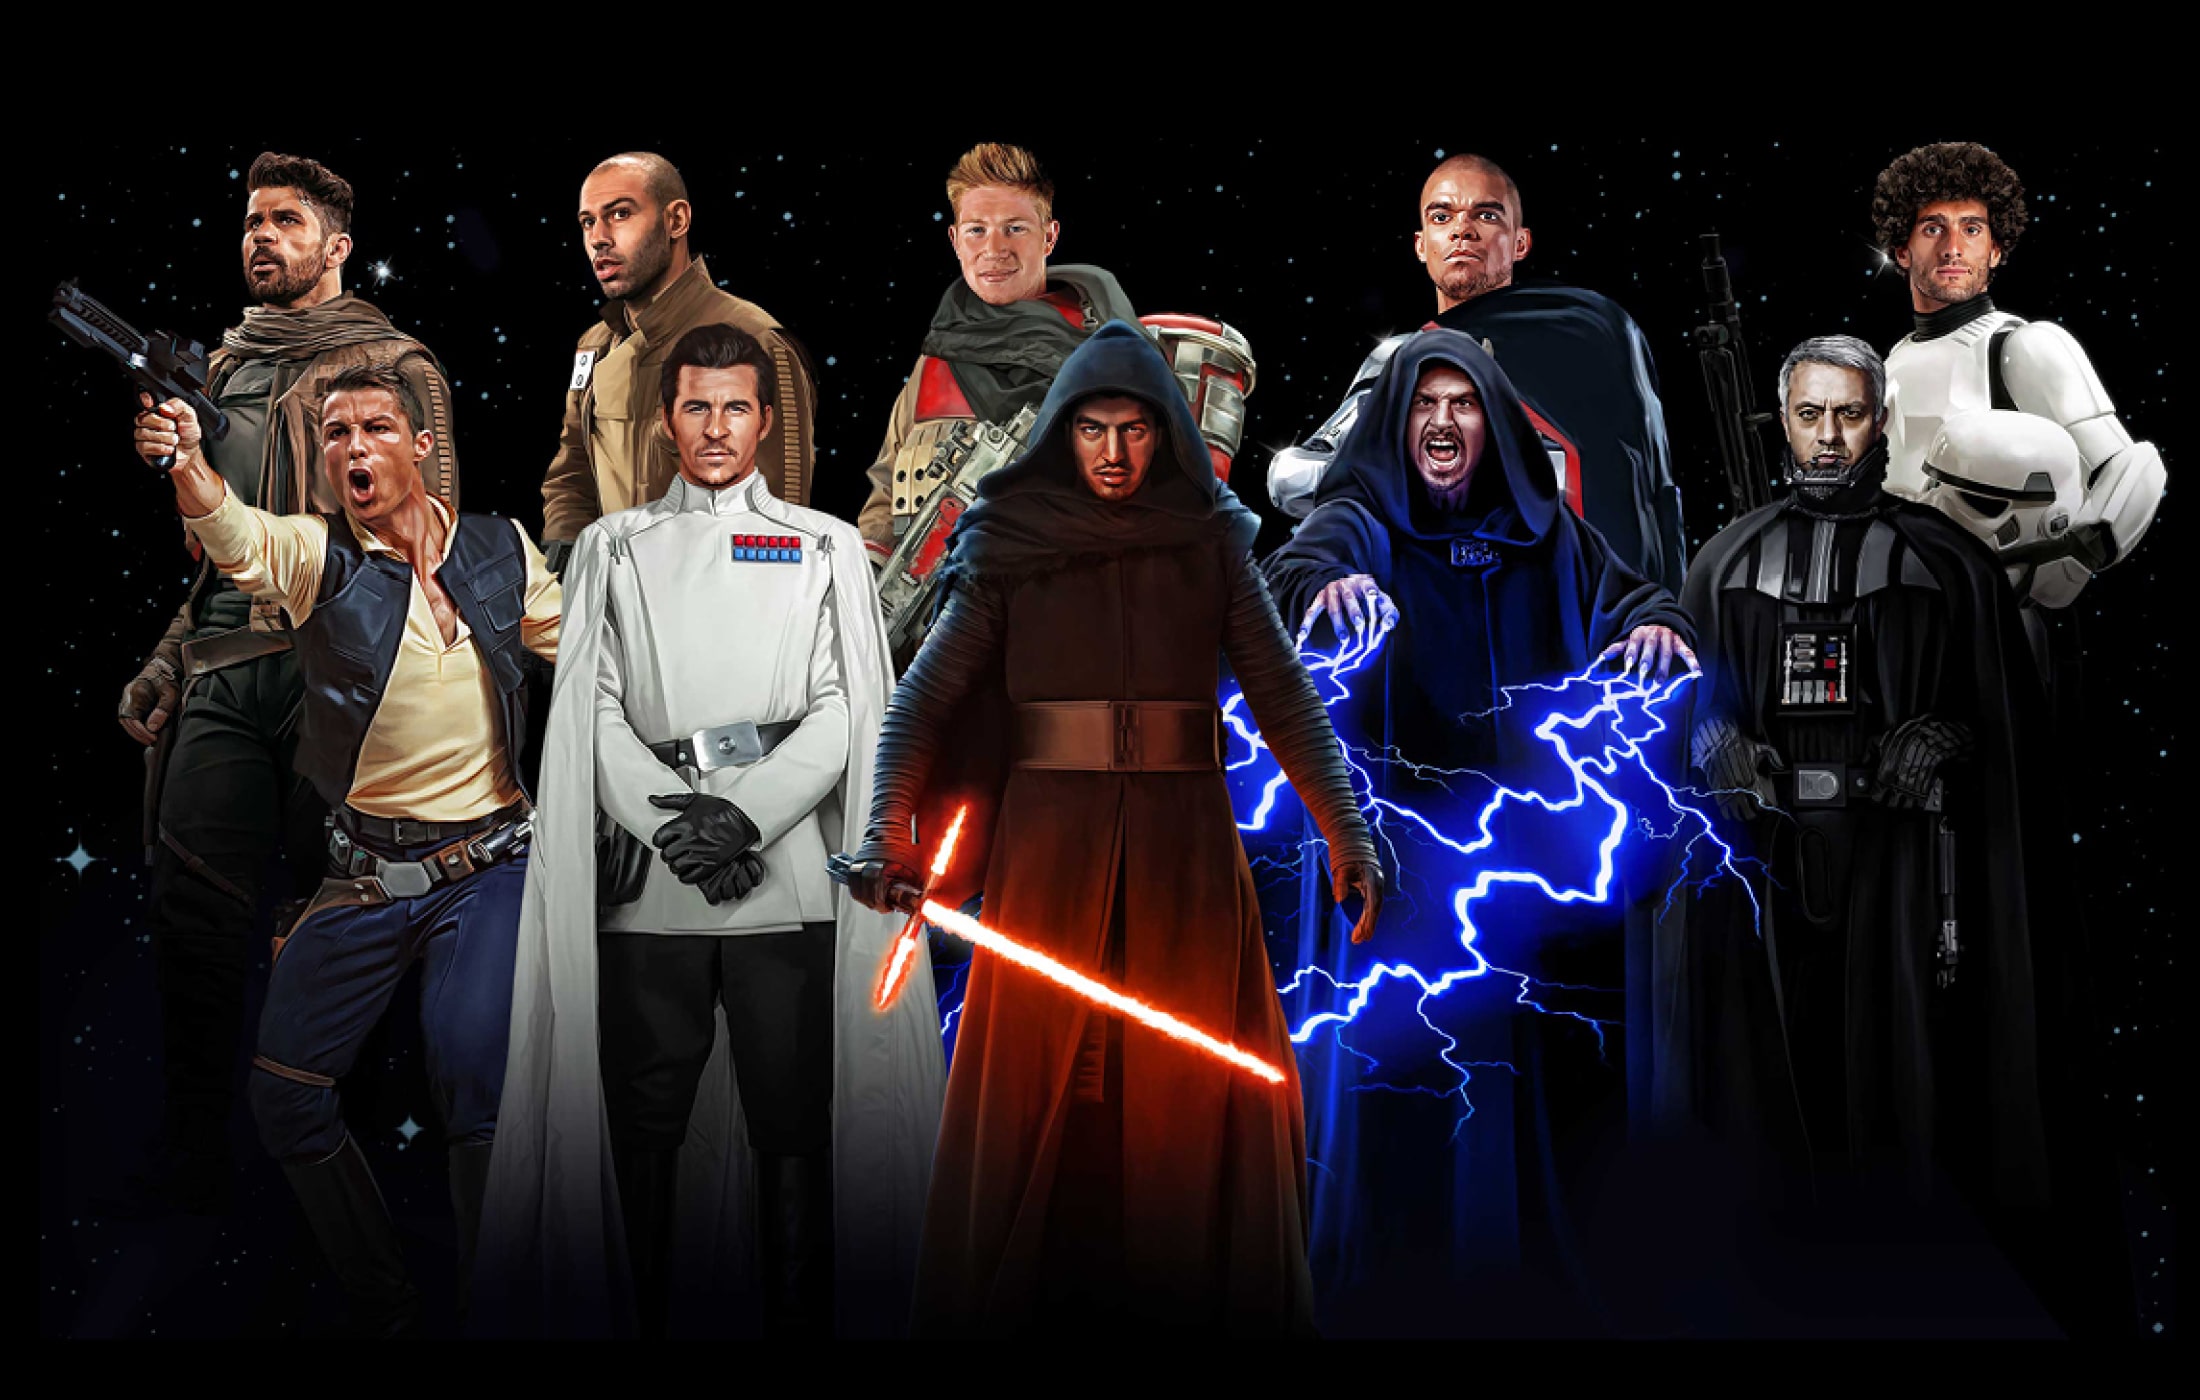 Football players as Star Wars characters